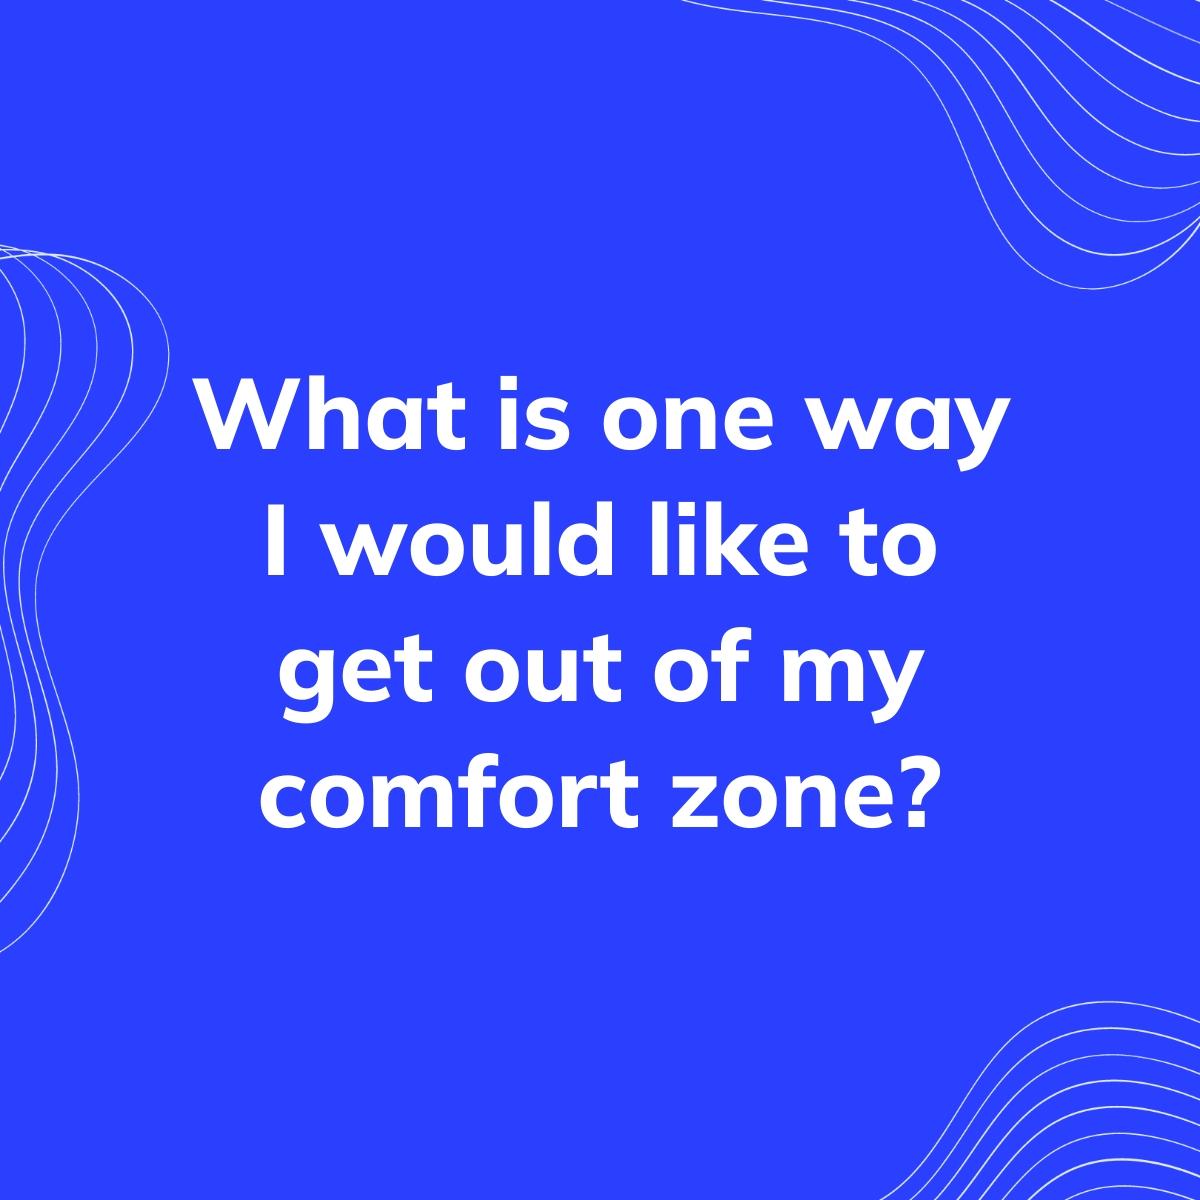 Journal Prompt: What is one way I would like to get out of my comfort zone?